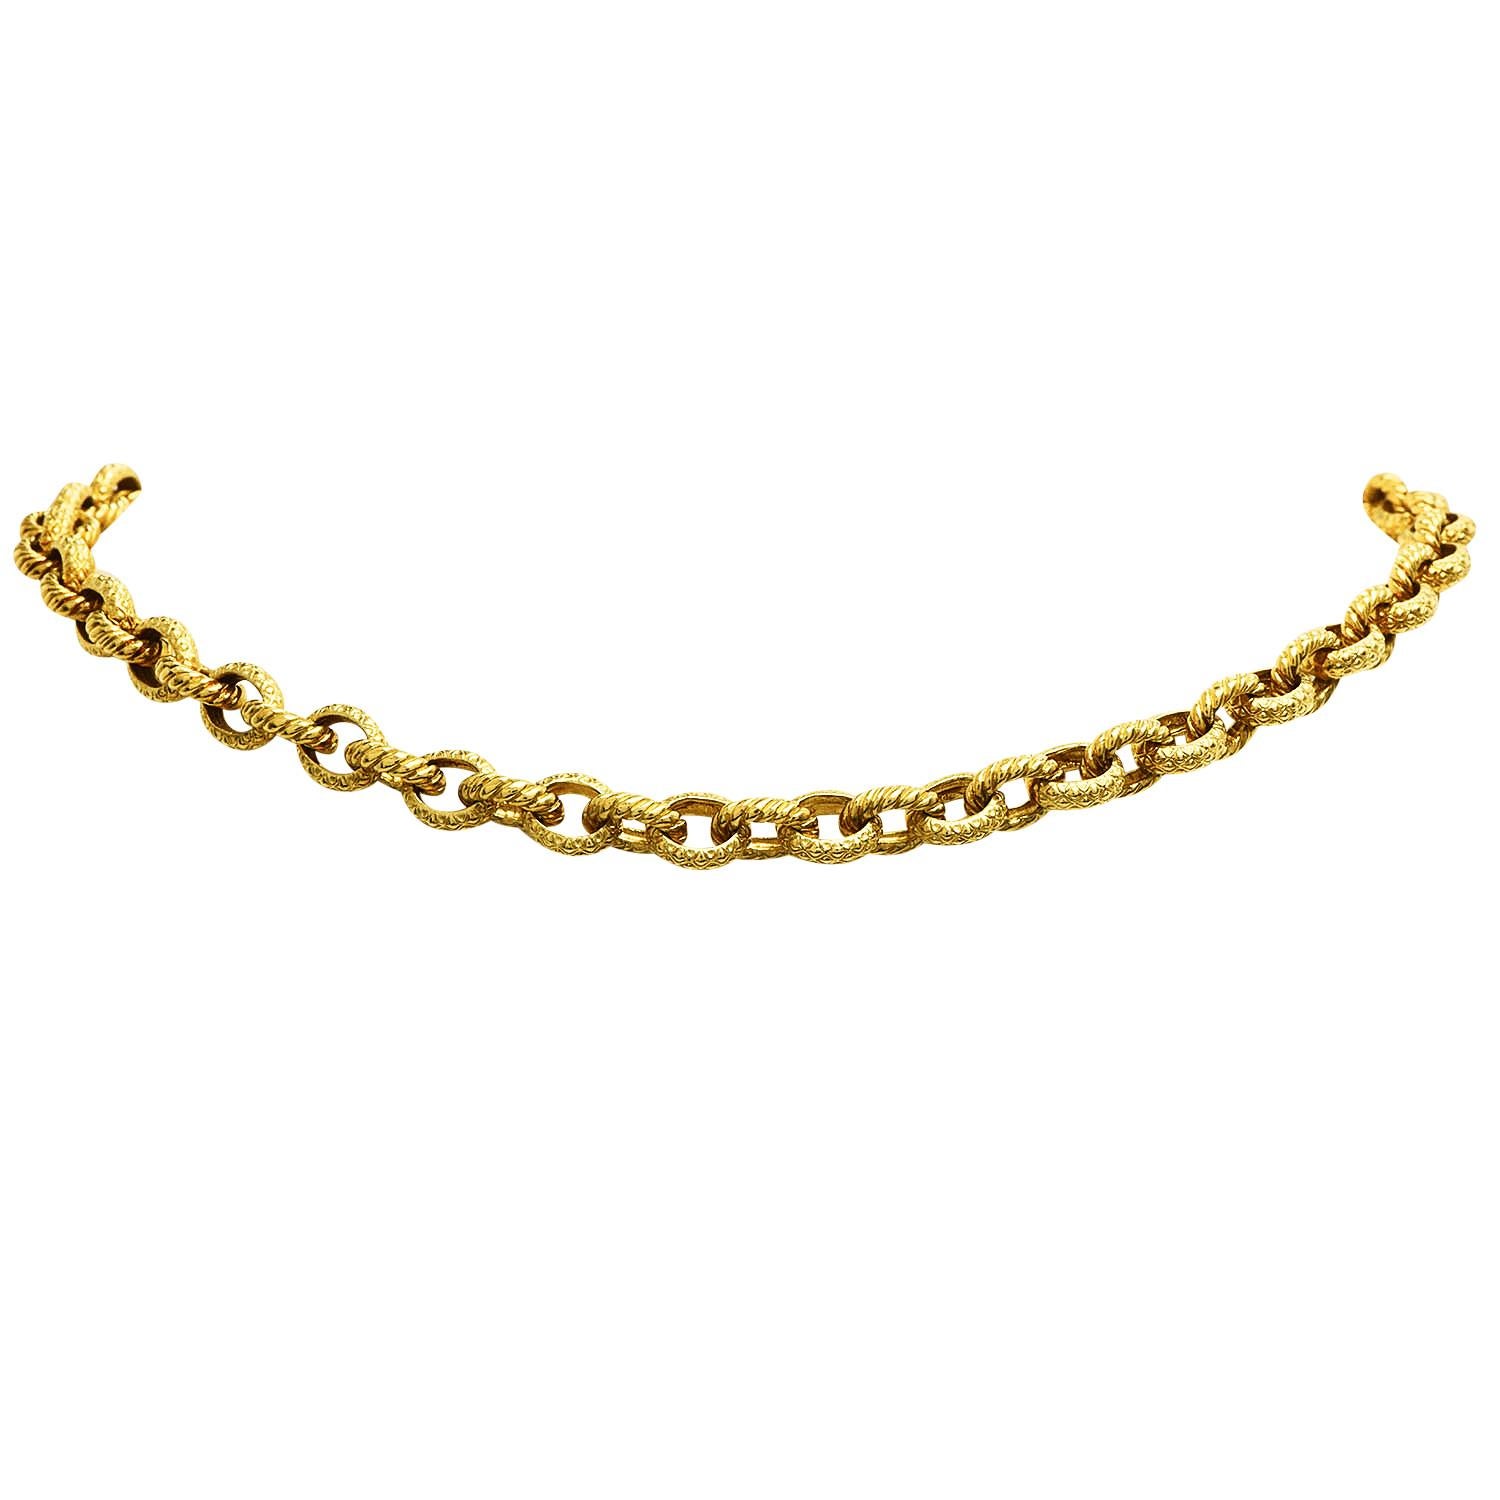 This stylish 1990s Diamond link choker necklace is crafted in 18K  yellow gold.  They feature textured solid gold links with two diamond oval shape links, a heart diamond charm, and a diamond clasp weighing approx. 4.30 carats. this necklace